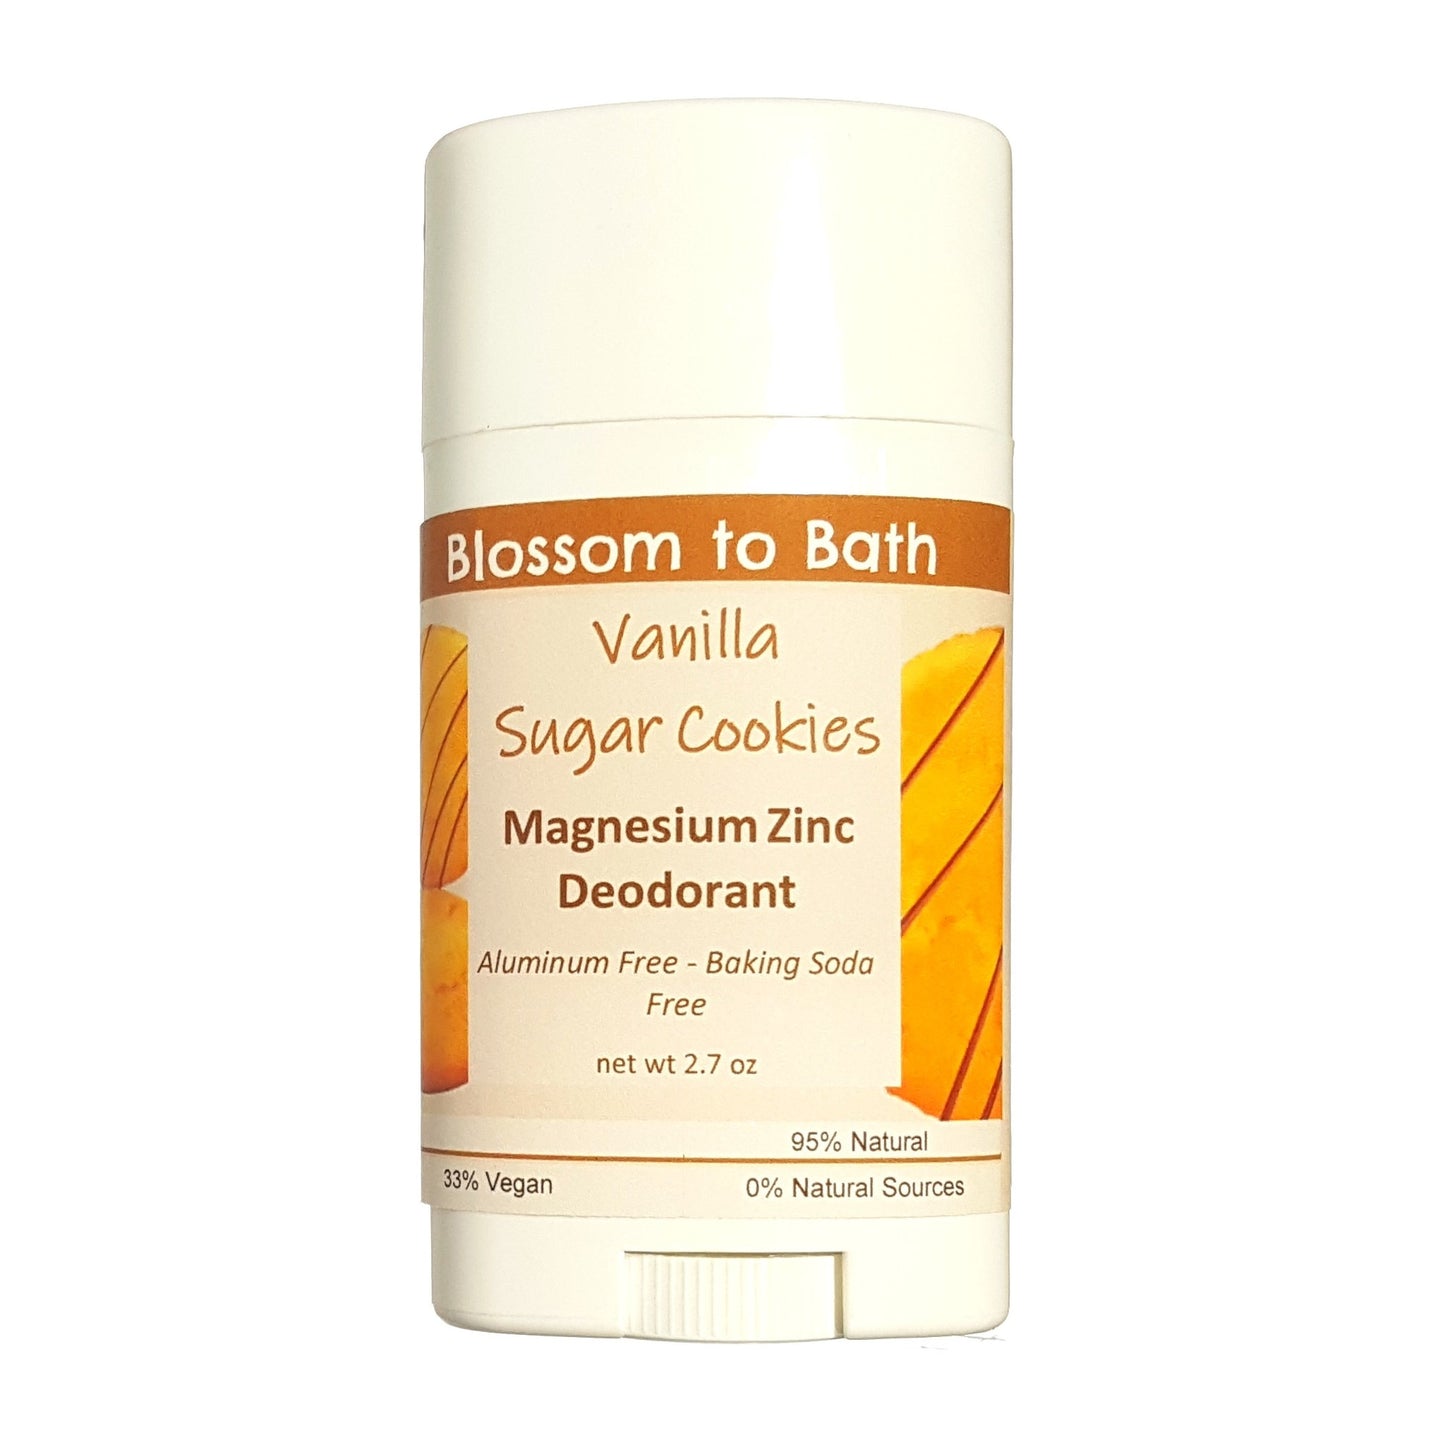 Buy Blossom to Bath Vanilla Sugar Cookies Magnesium Zinc Deodorant from Flowersong Soap Studio.  Long lasting protection made from organic botanicals and butters, made without baking soda, tested in the Arizona heat  Smells like sugar cookies in the oven.